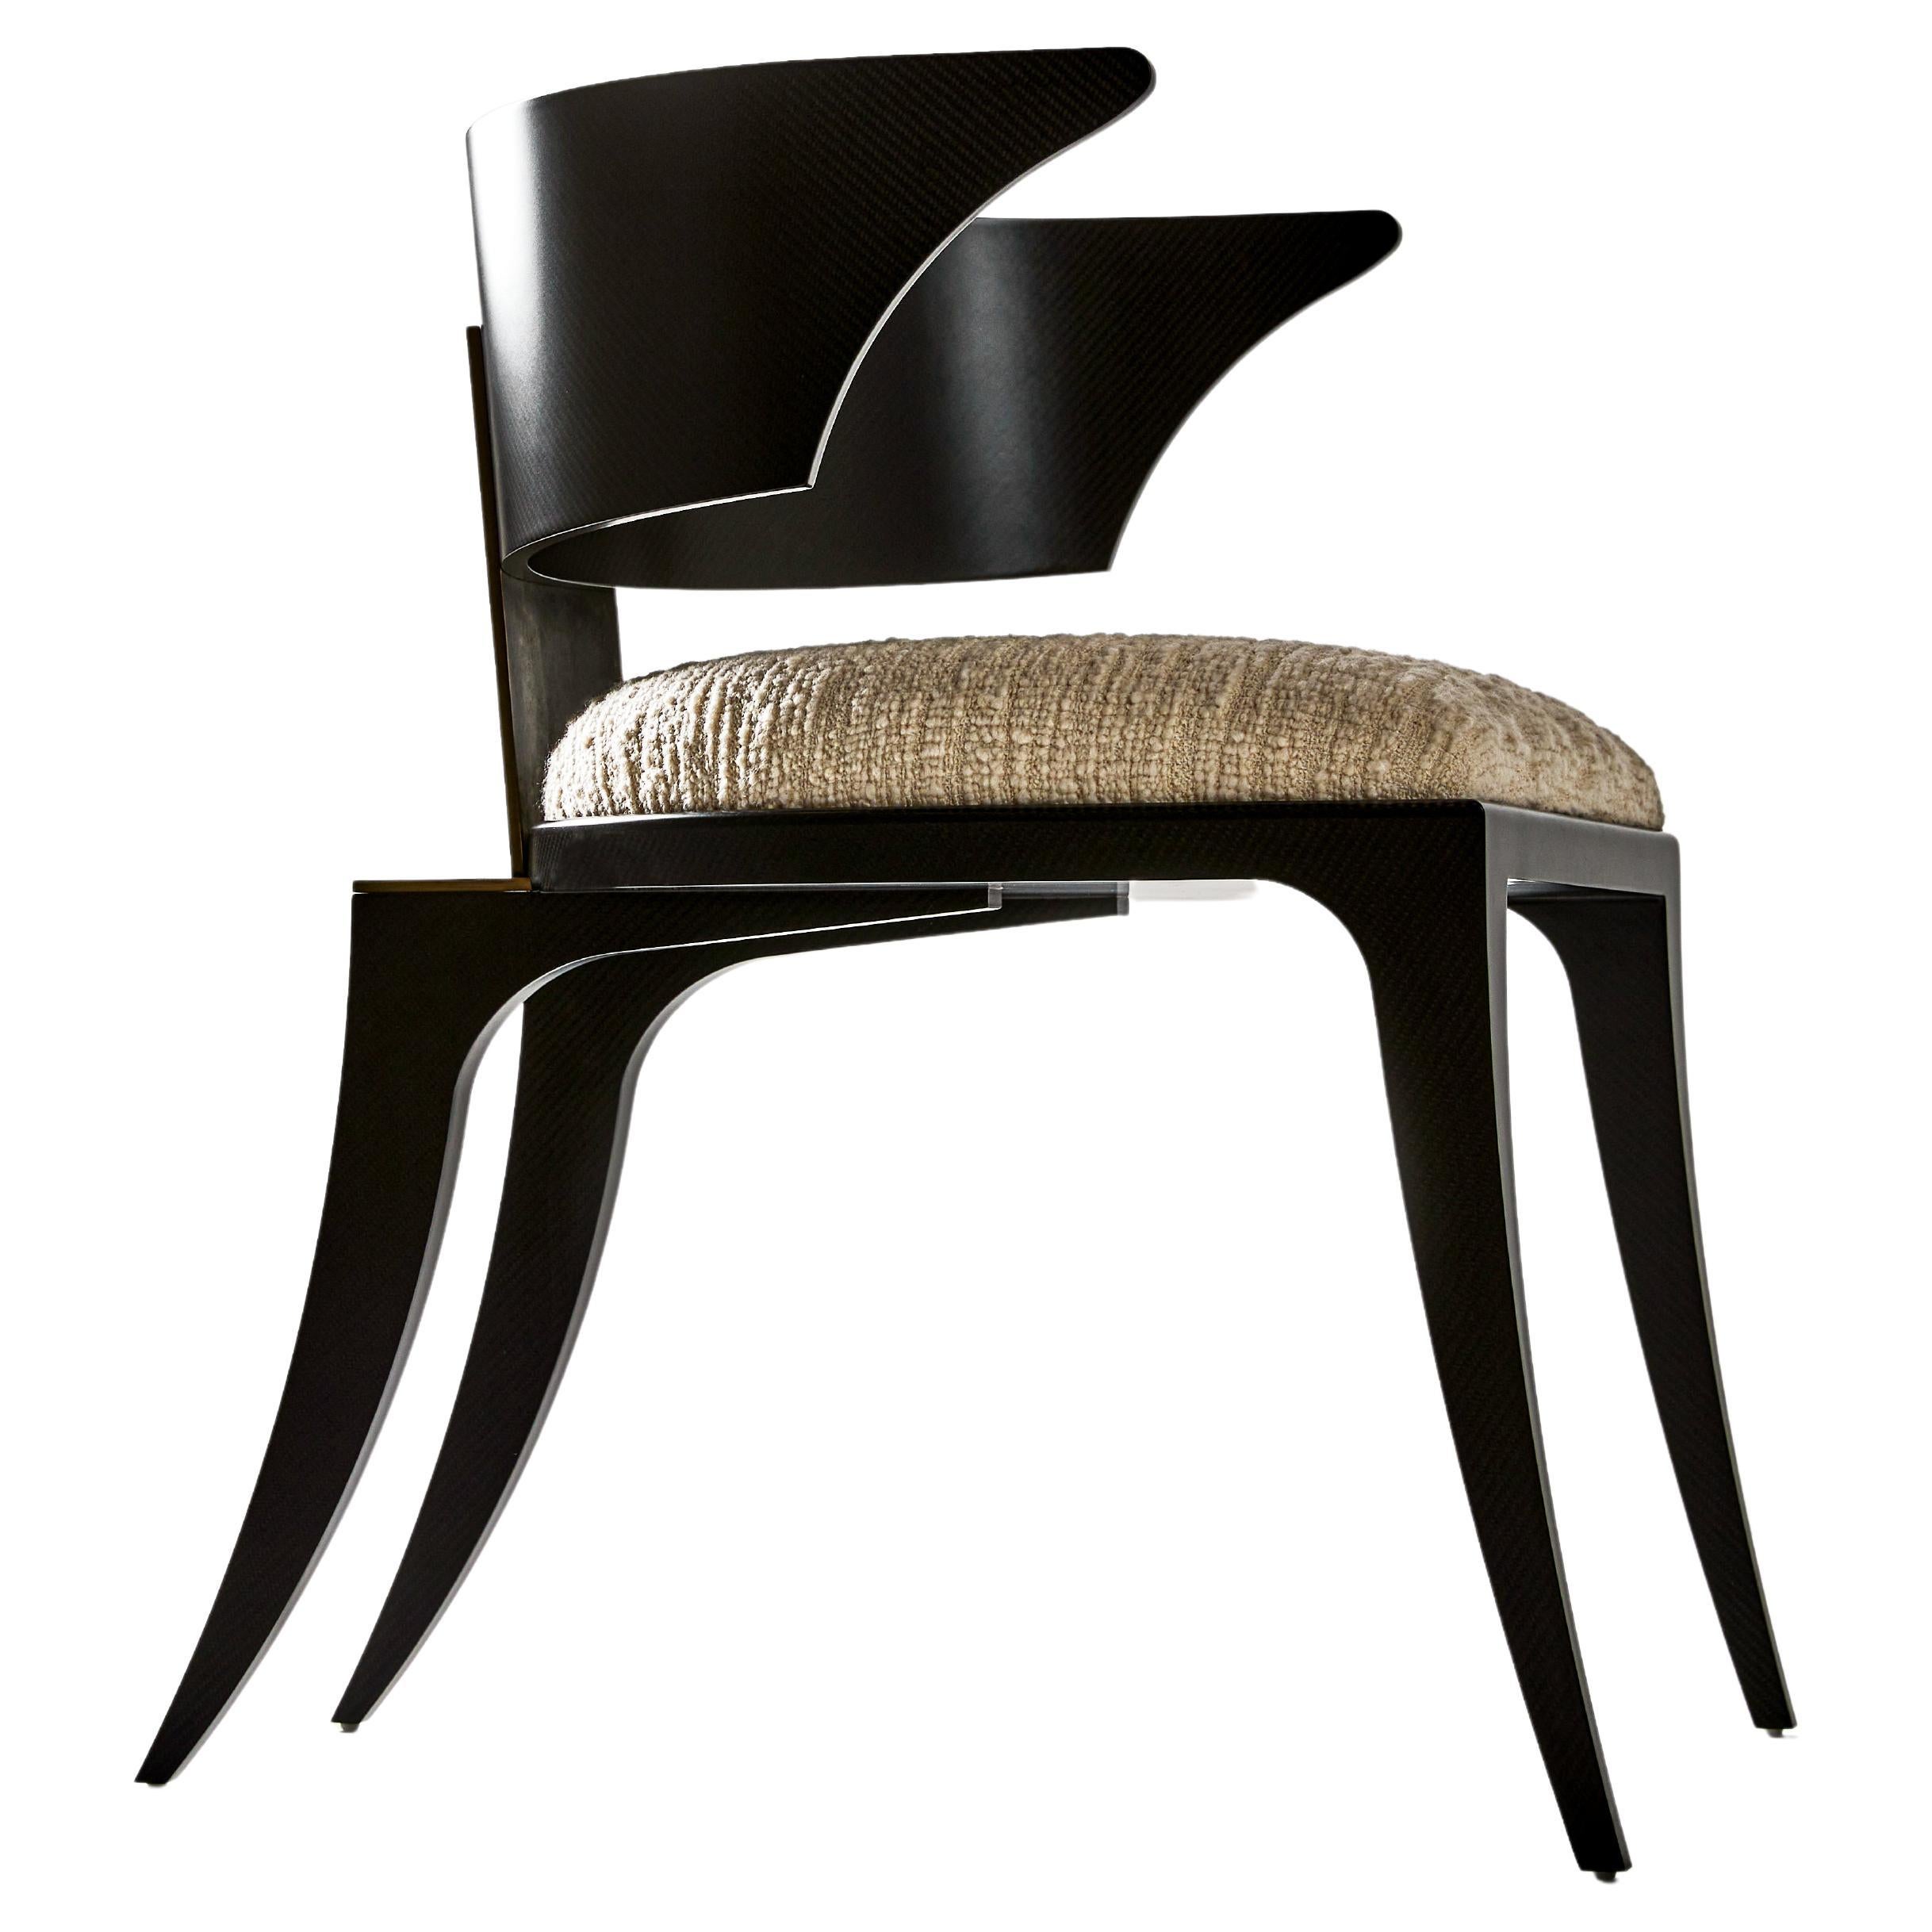 Three One Four Studio, "Hope" Chair, Klismos, Carbon Fibre, Bronze, Upholstered For Sale